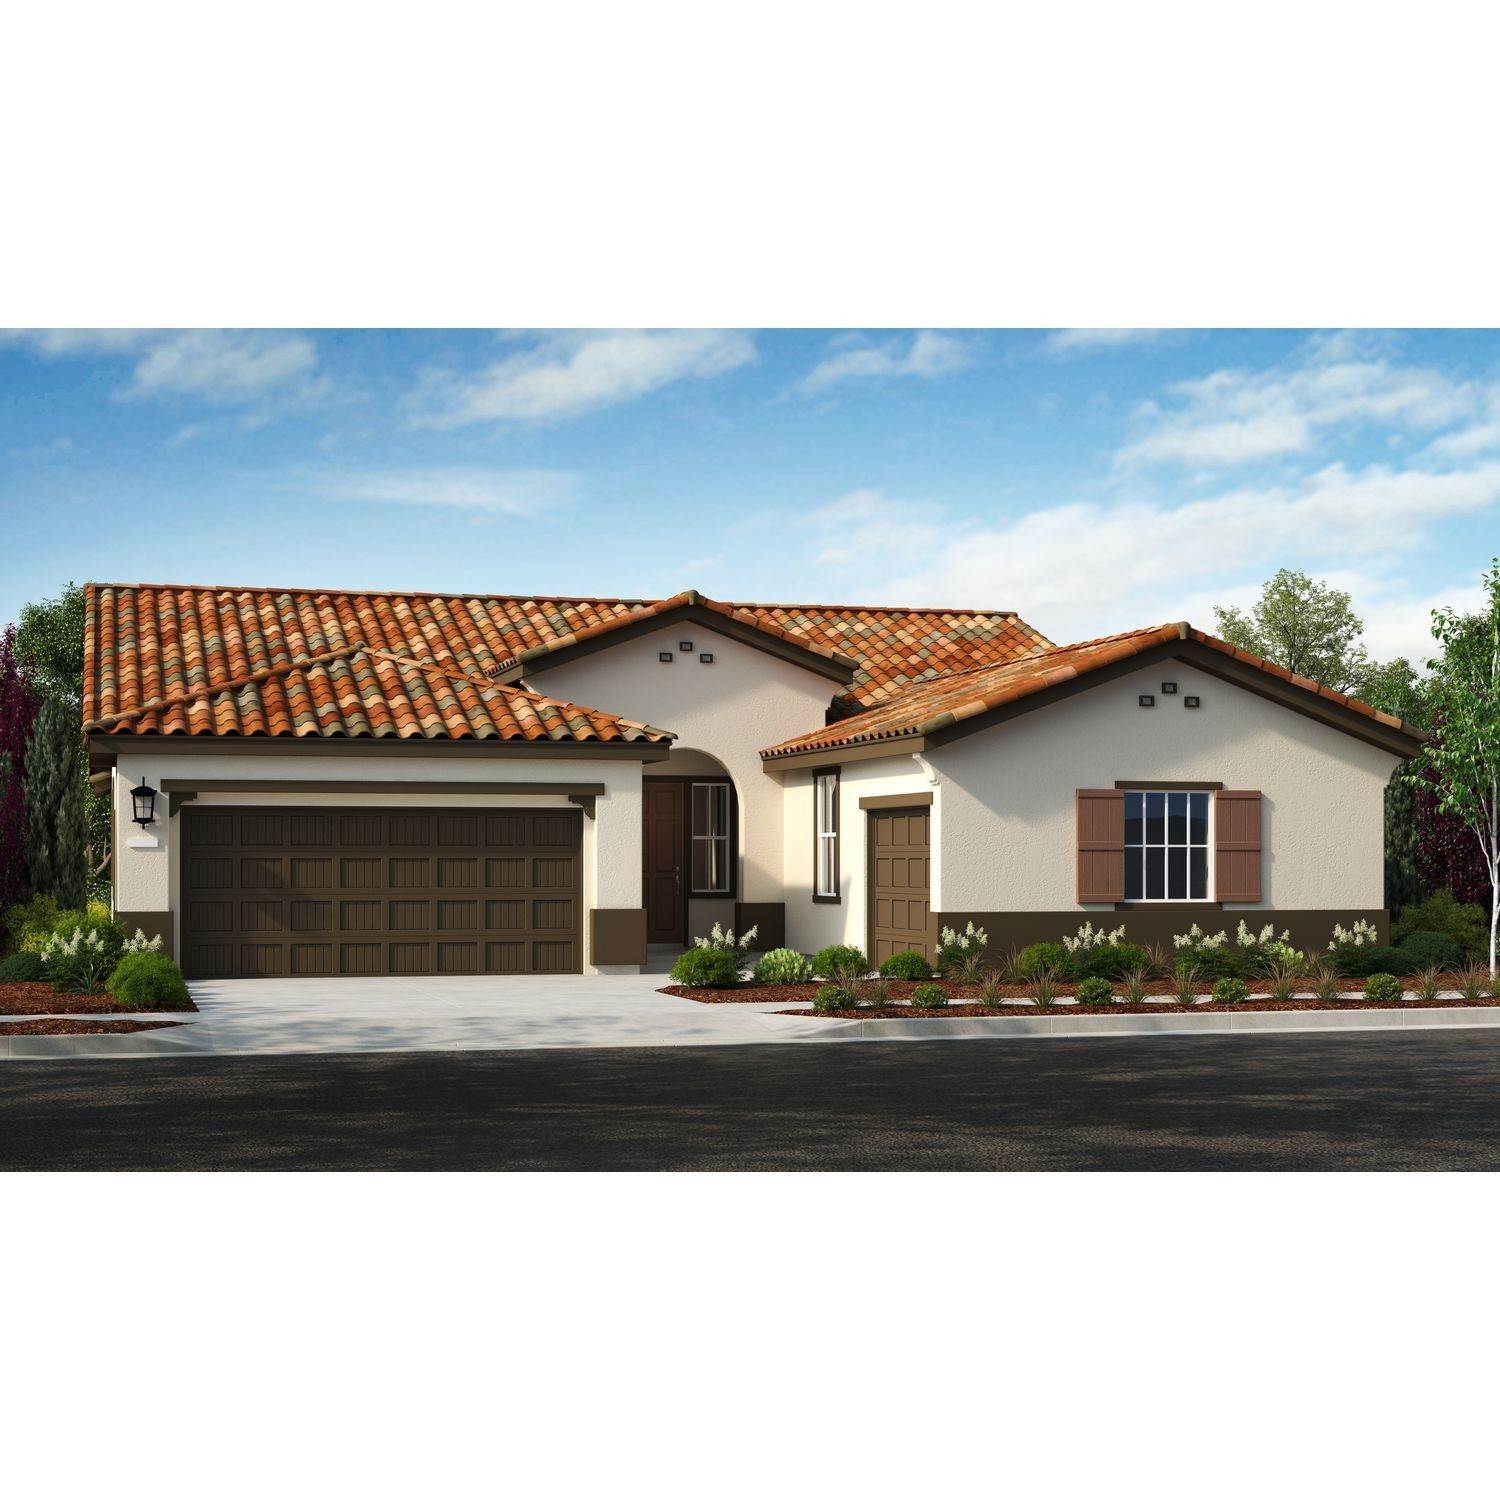 Single Family for Sale at Magnolia At Fiddyment Farm 3009 Mosaic Way, Roseville, CA 95747